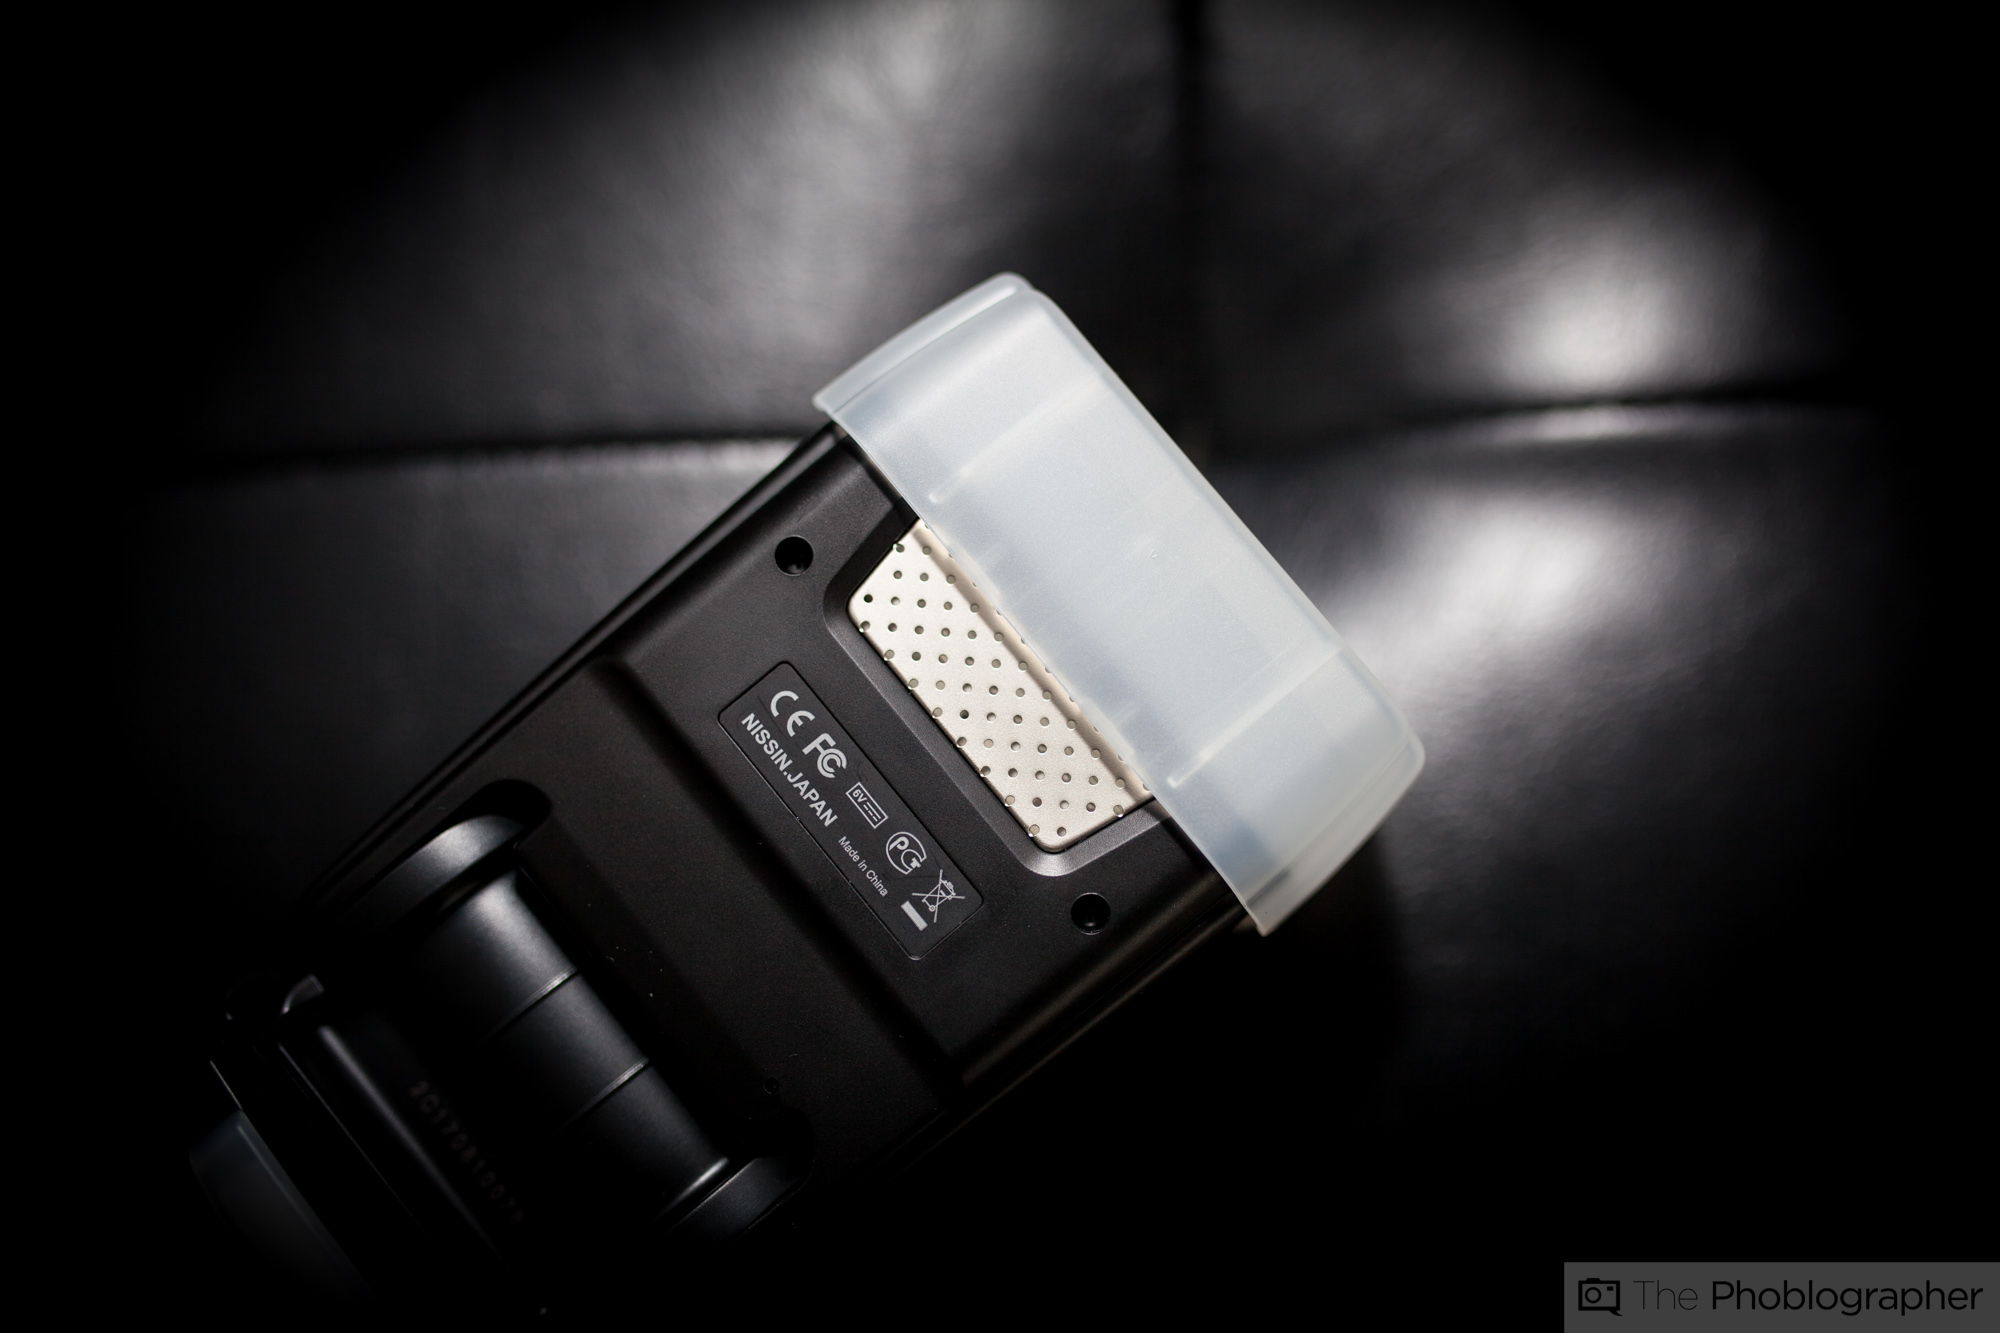 These Are The Speedlights We Recommend For Lighting Up Your Party Photography